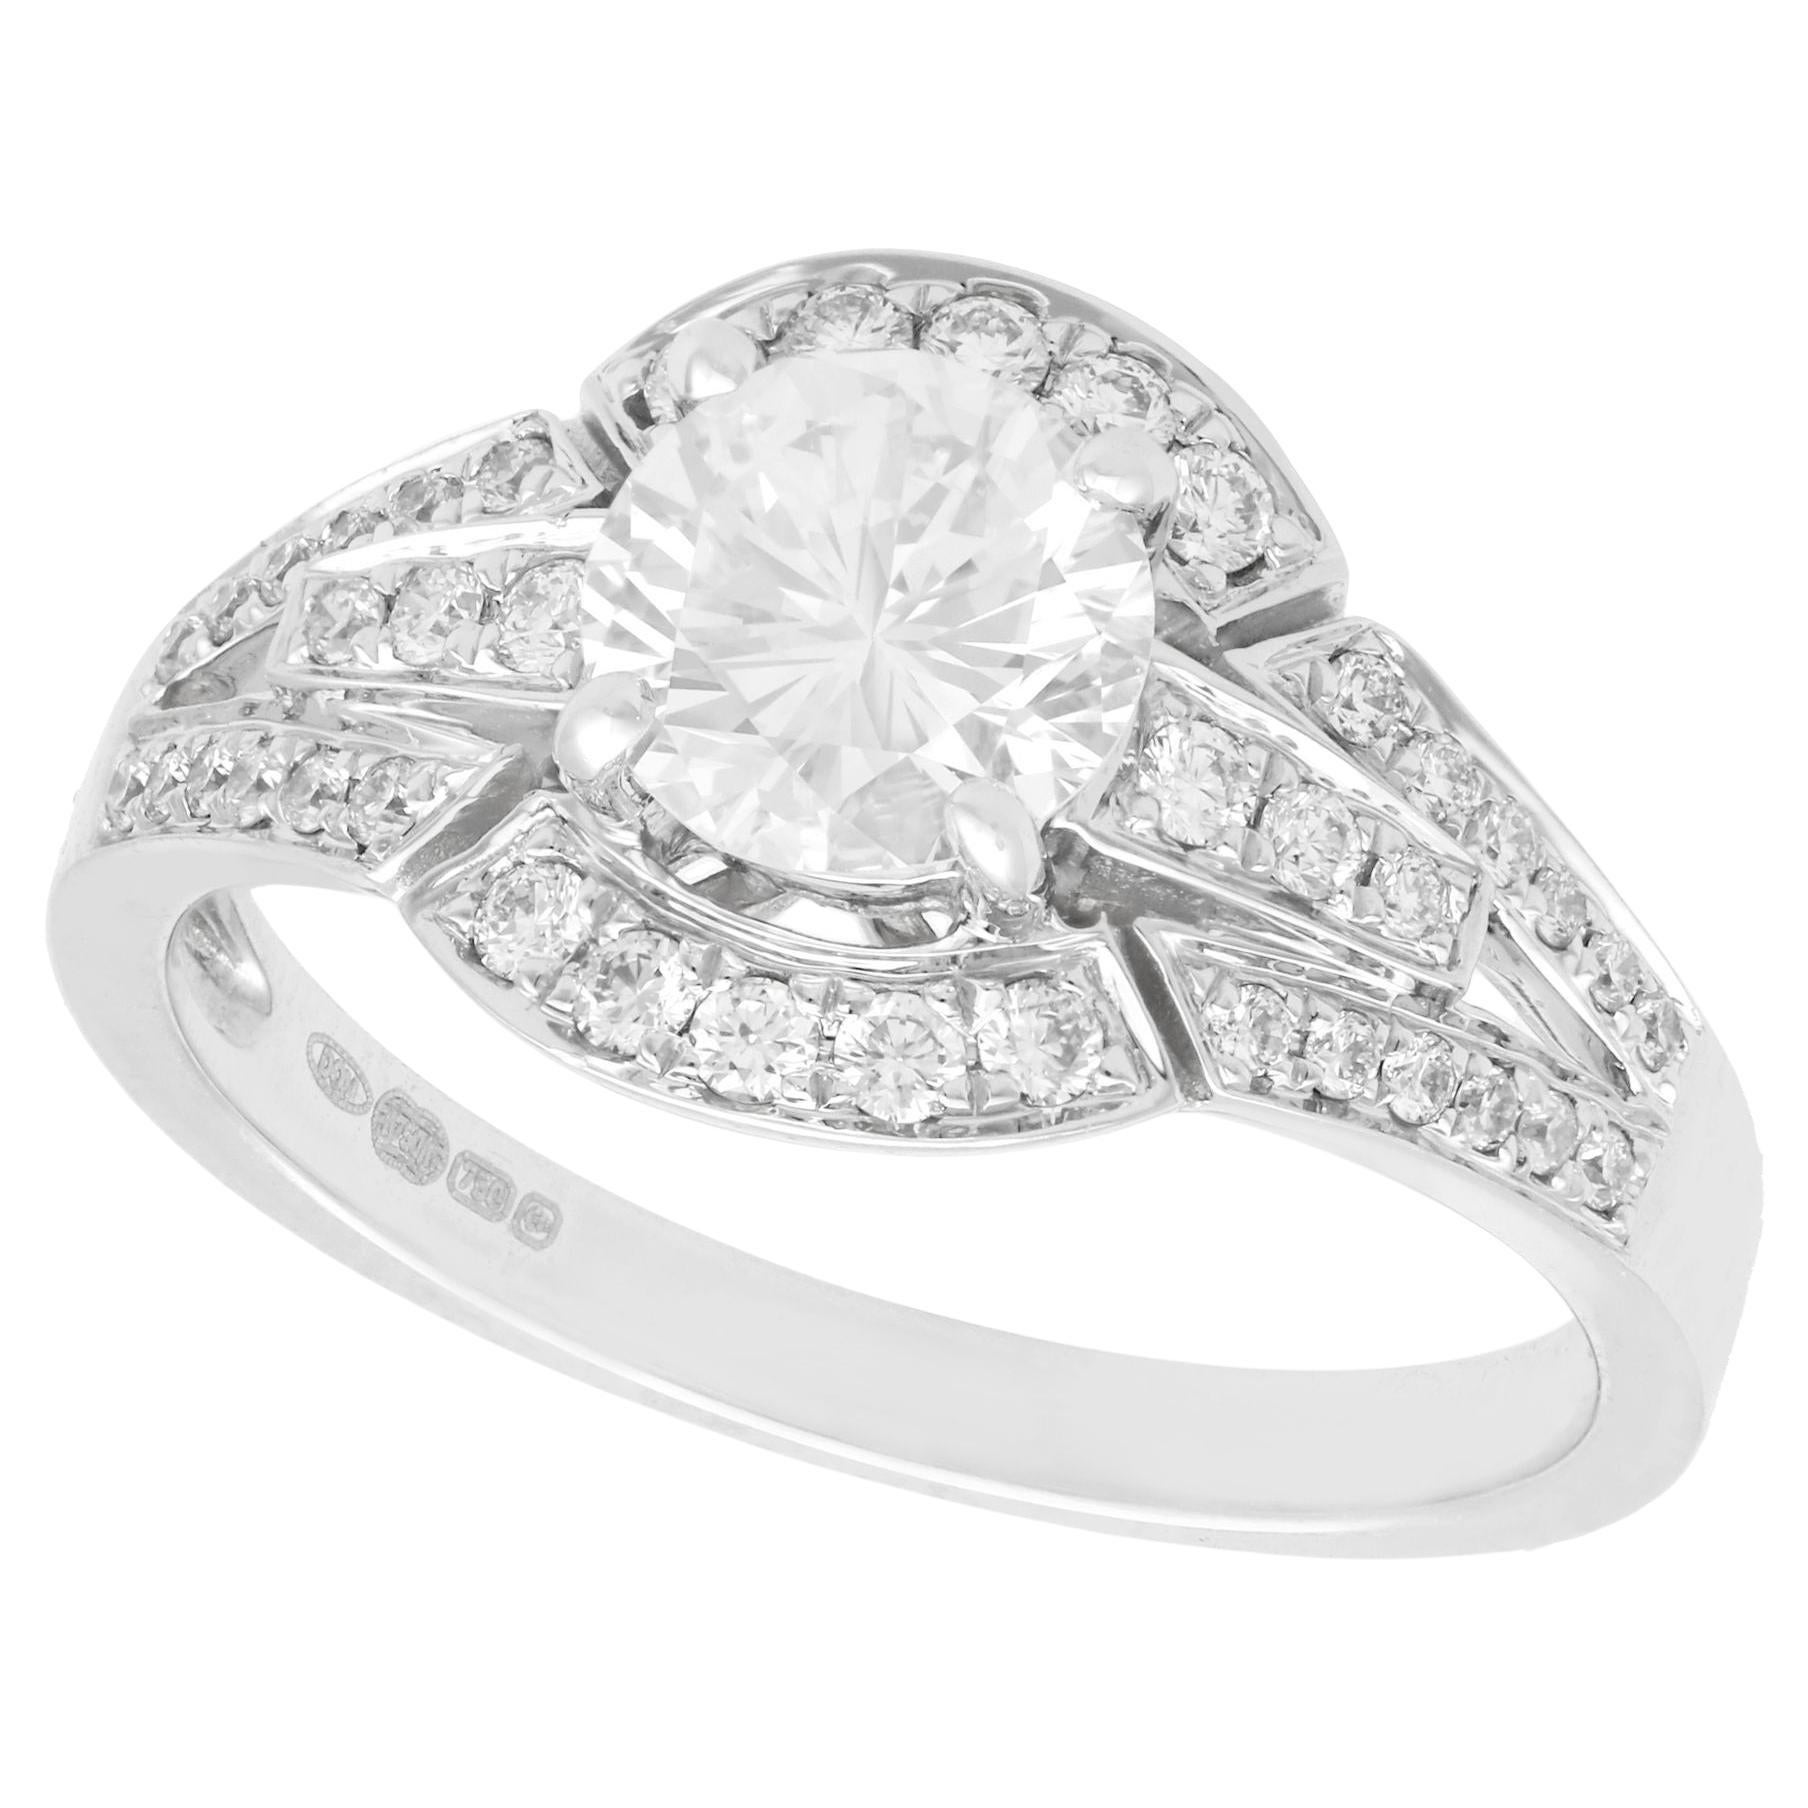 1.26 Carat Diamond and White Gold Engagement Ring